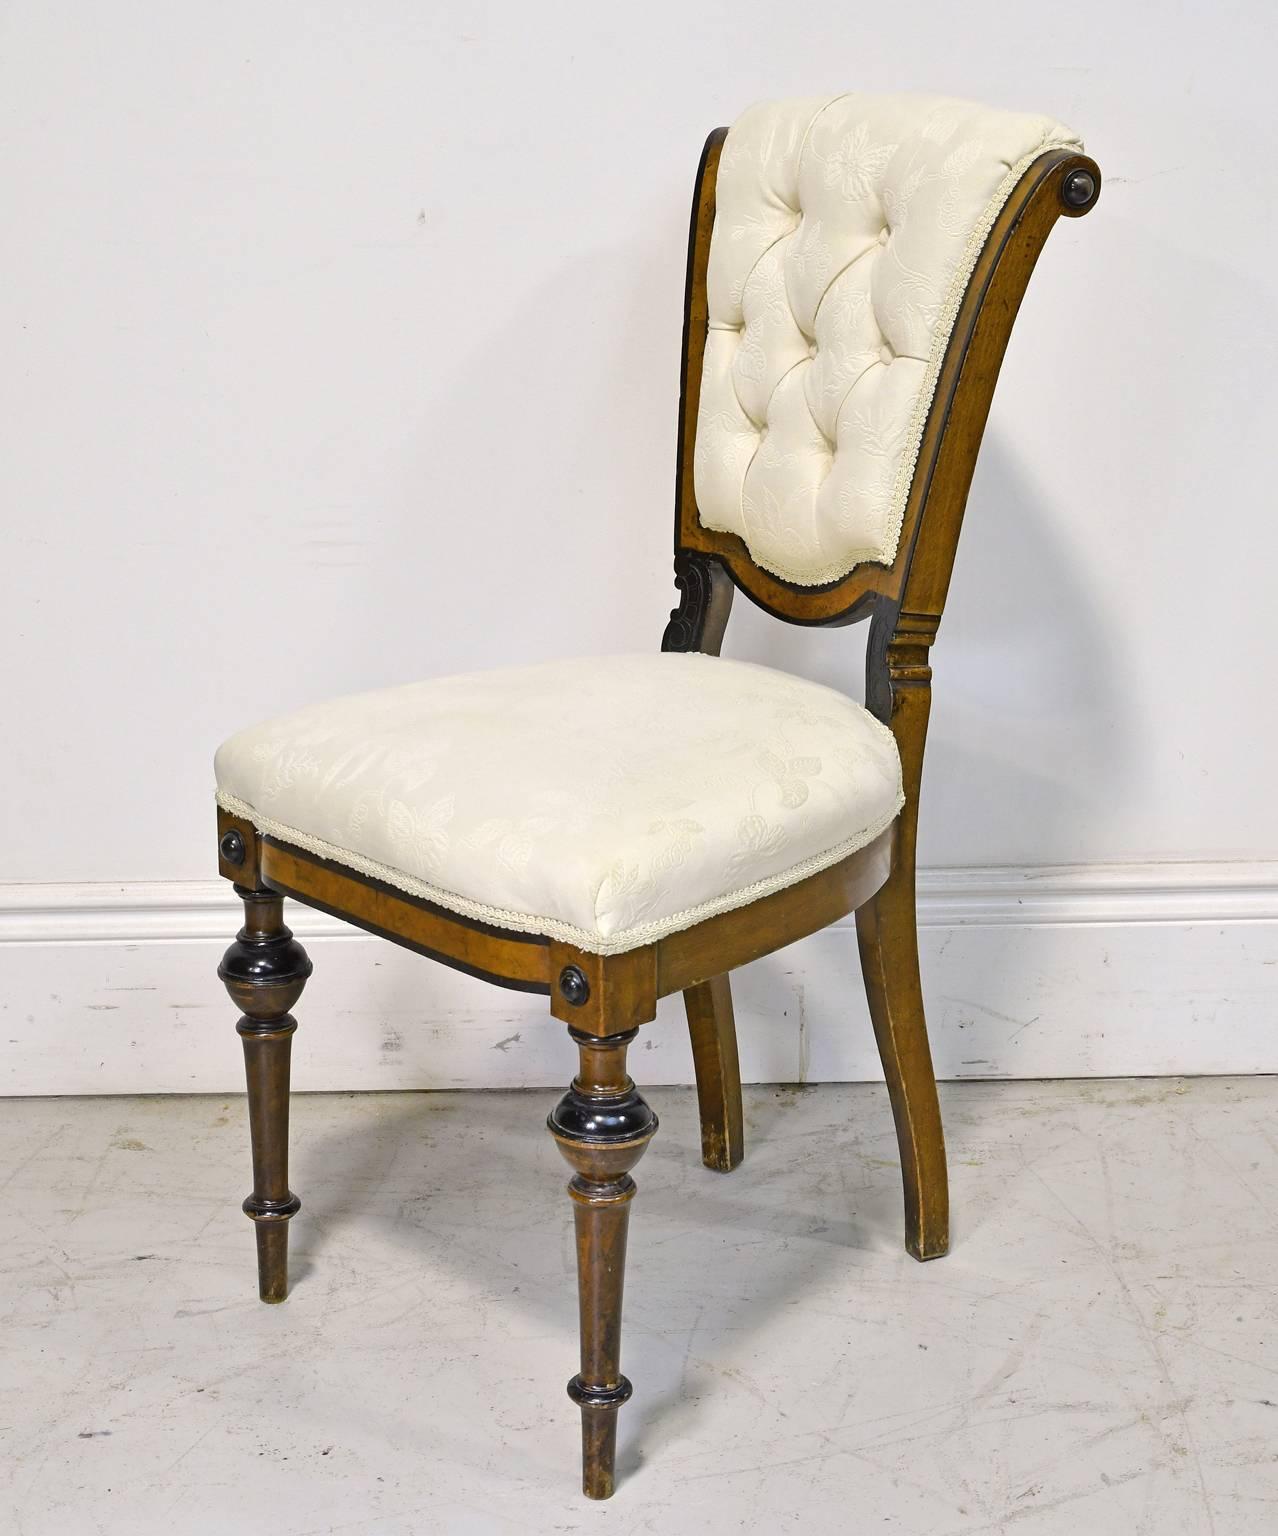 A very sculptural-looking chair with tufted, scroll-back & upholstered seat, and resting on turned front legs. In walnut with ebonized details that highlight the beautiful silhouette of the chair.  Denmark, circa 1870.
Note: Very comfortable!